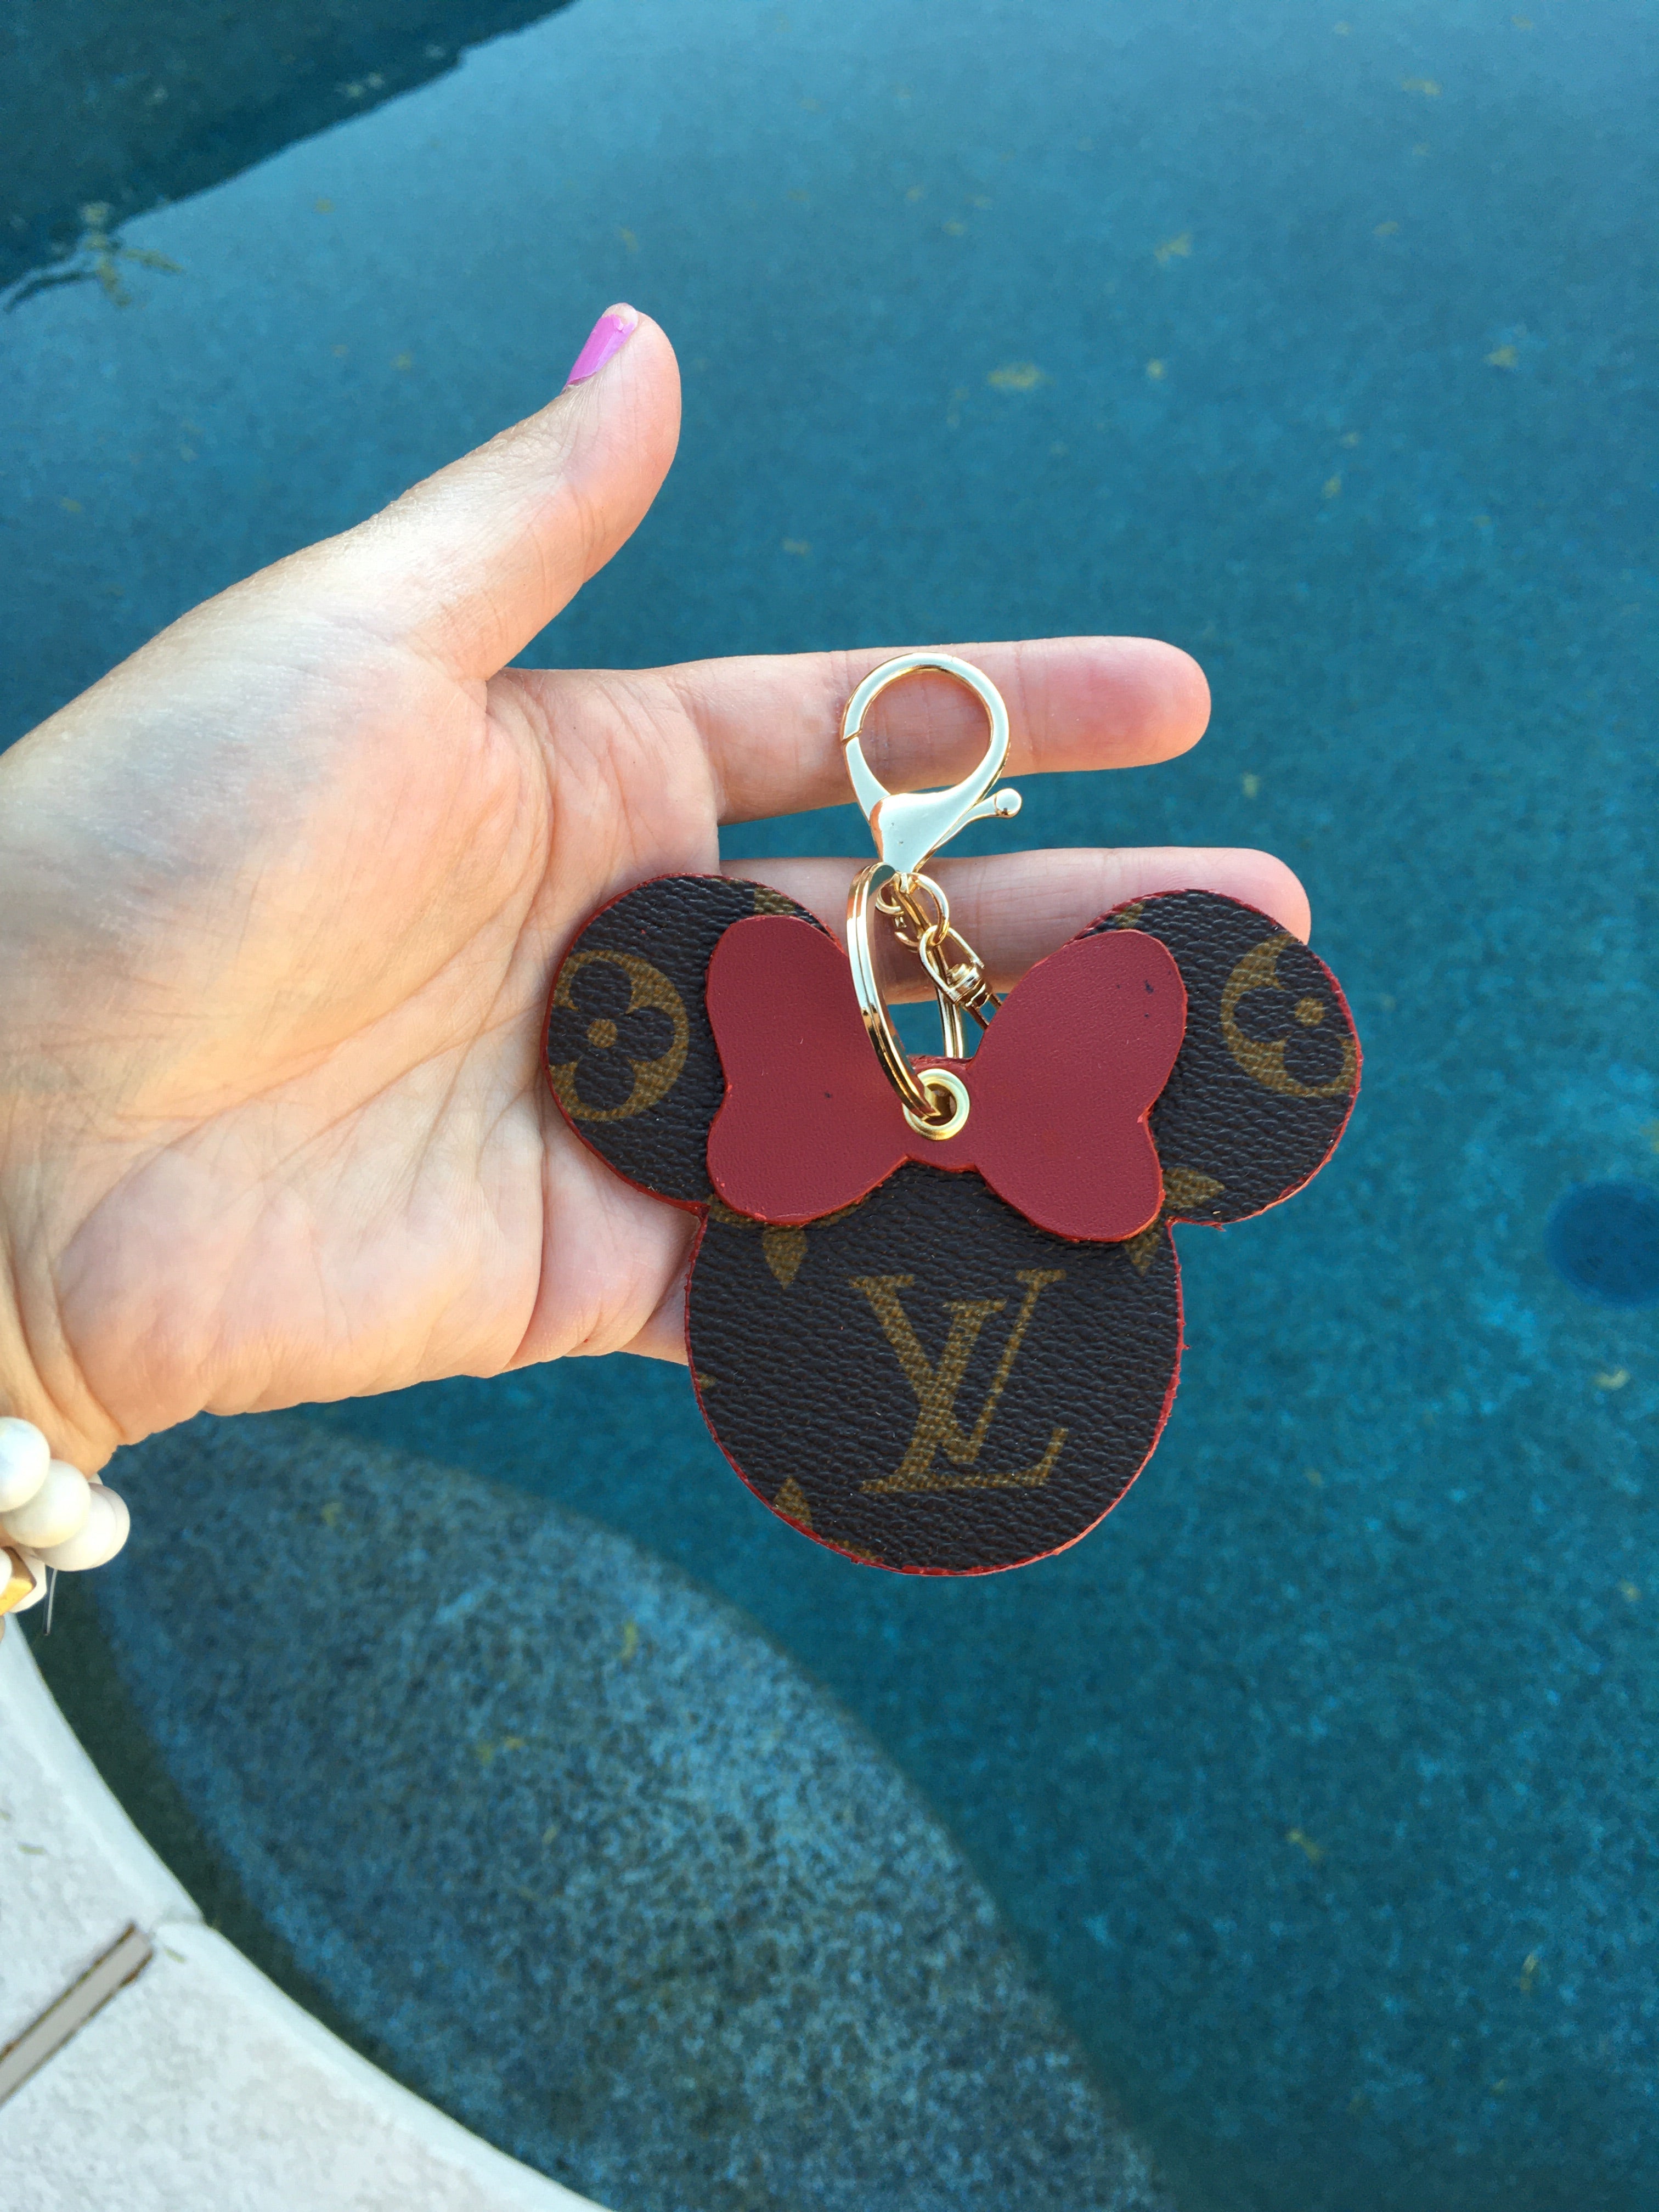 Heart shaped Keychain upcycled from authentic Louis Vuitton luggage